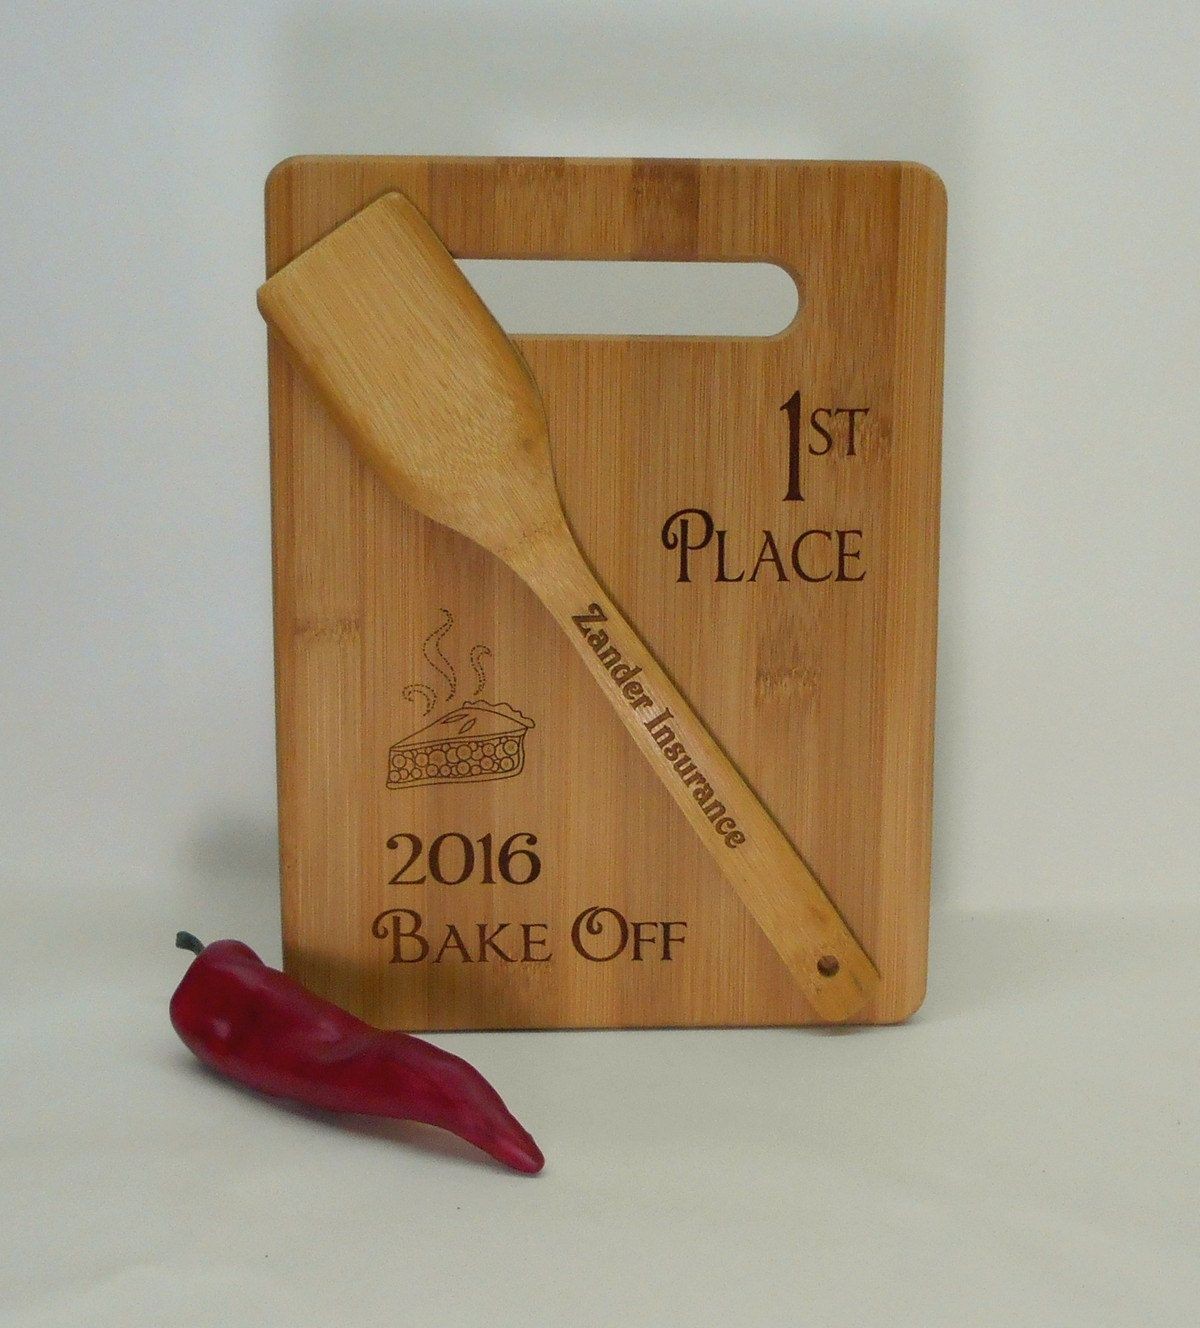 Chili Cook Off 1 Award Plaque Bake Wood Cooking Ideas